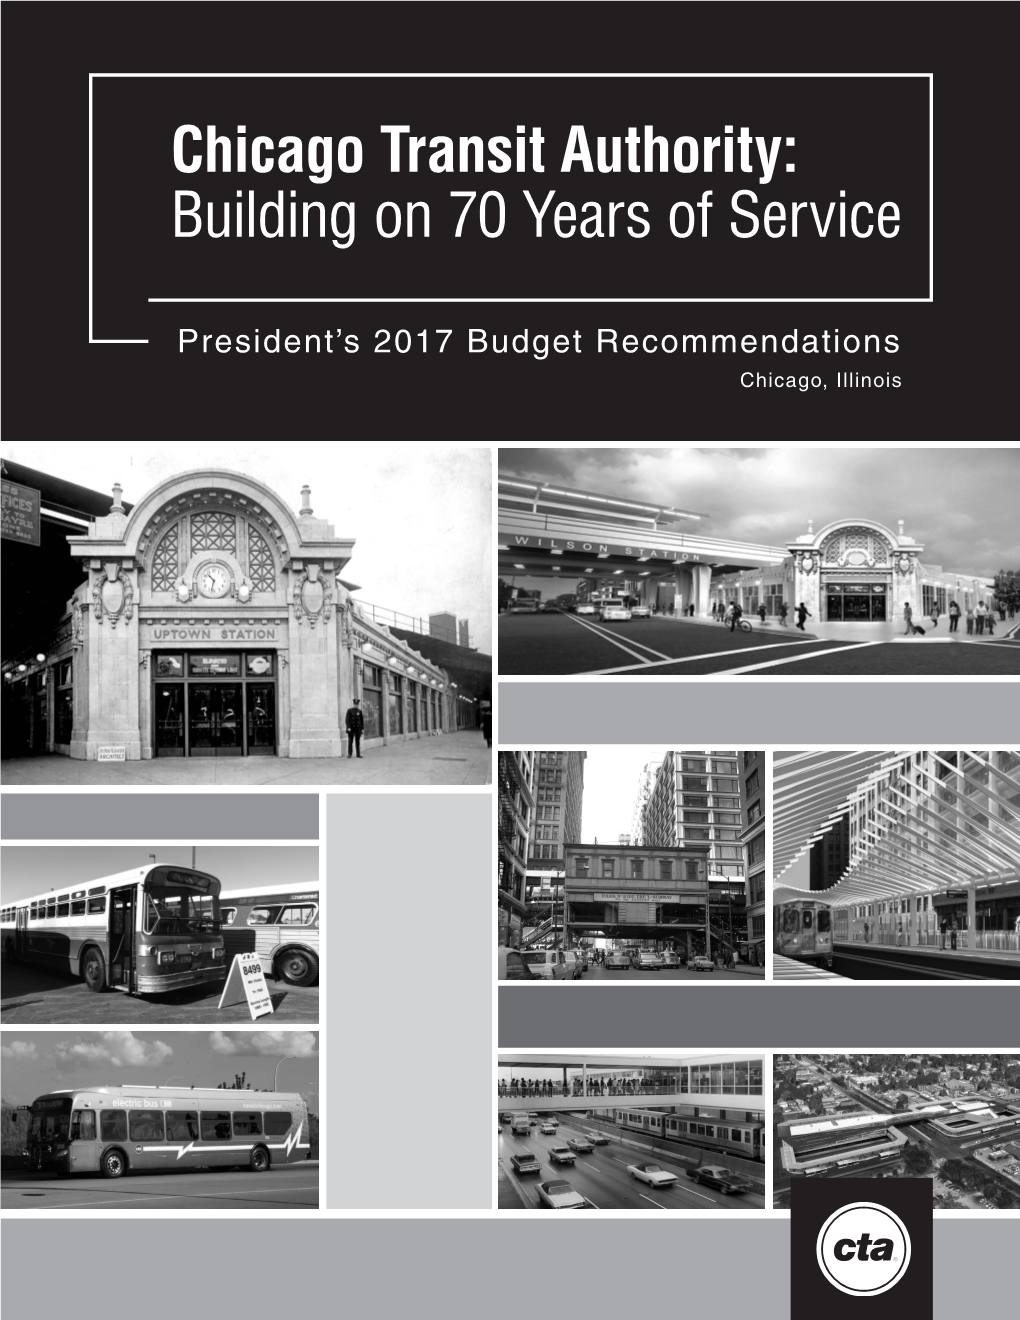 Building on 70 Years of Service